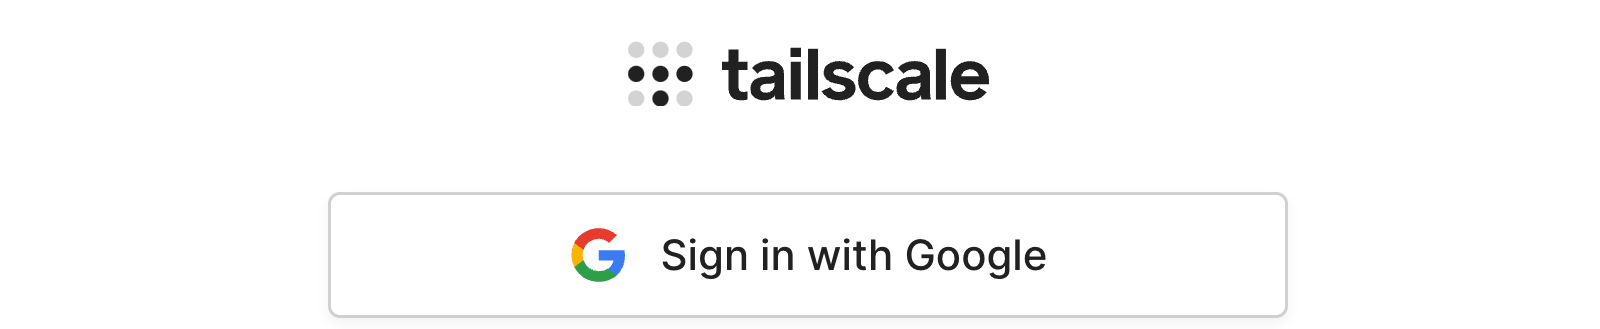 A truncated screenshot of tailscale's log in page which only shows Google as an option